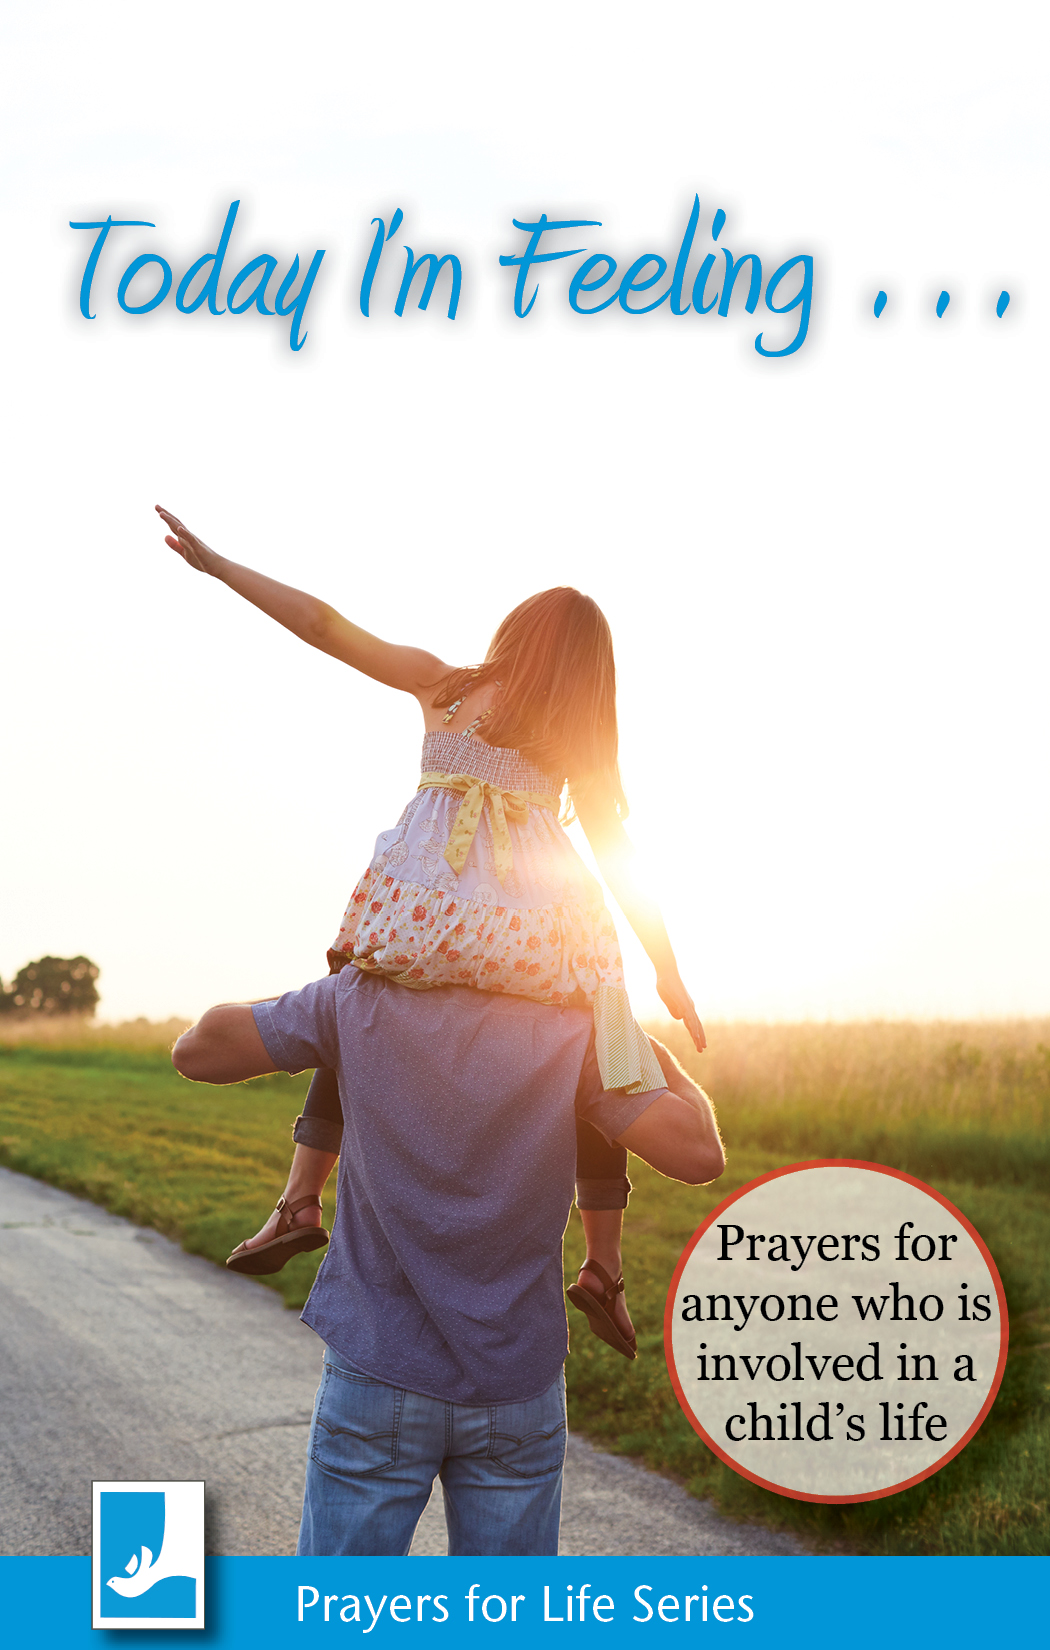 Today I’m Feeling … Prayers for anyone who is involved in a child’s life